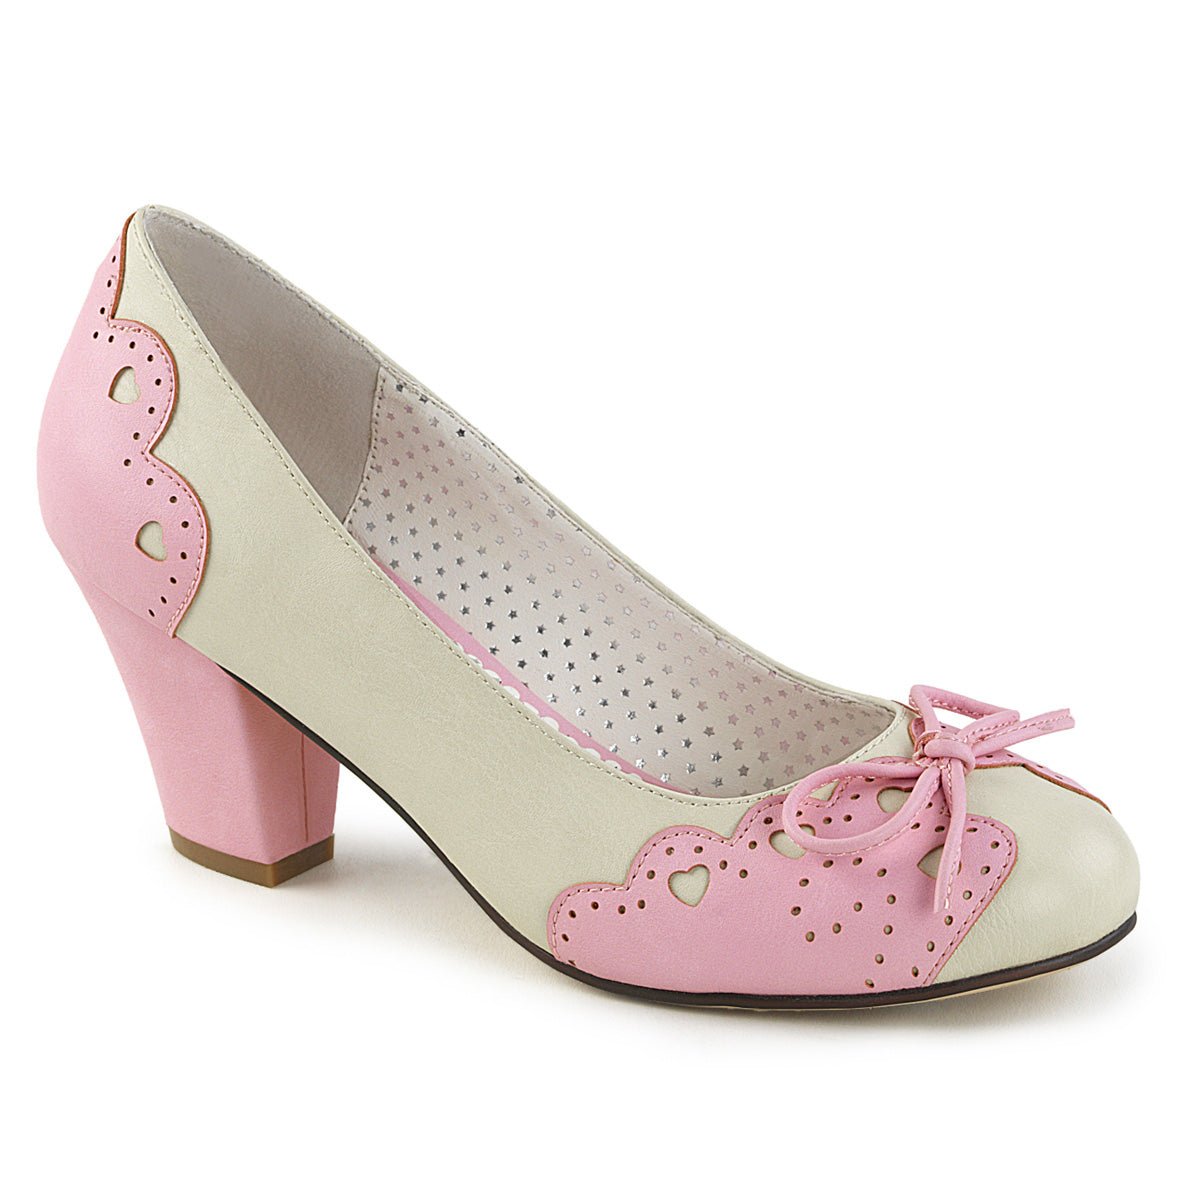 Pin Up Couture WIGGLE 17 Court Shoes - From Pin Up Couture Sold By Alternative Footwear